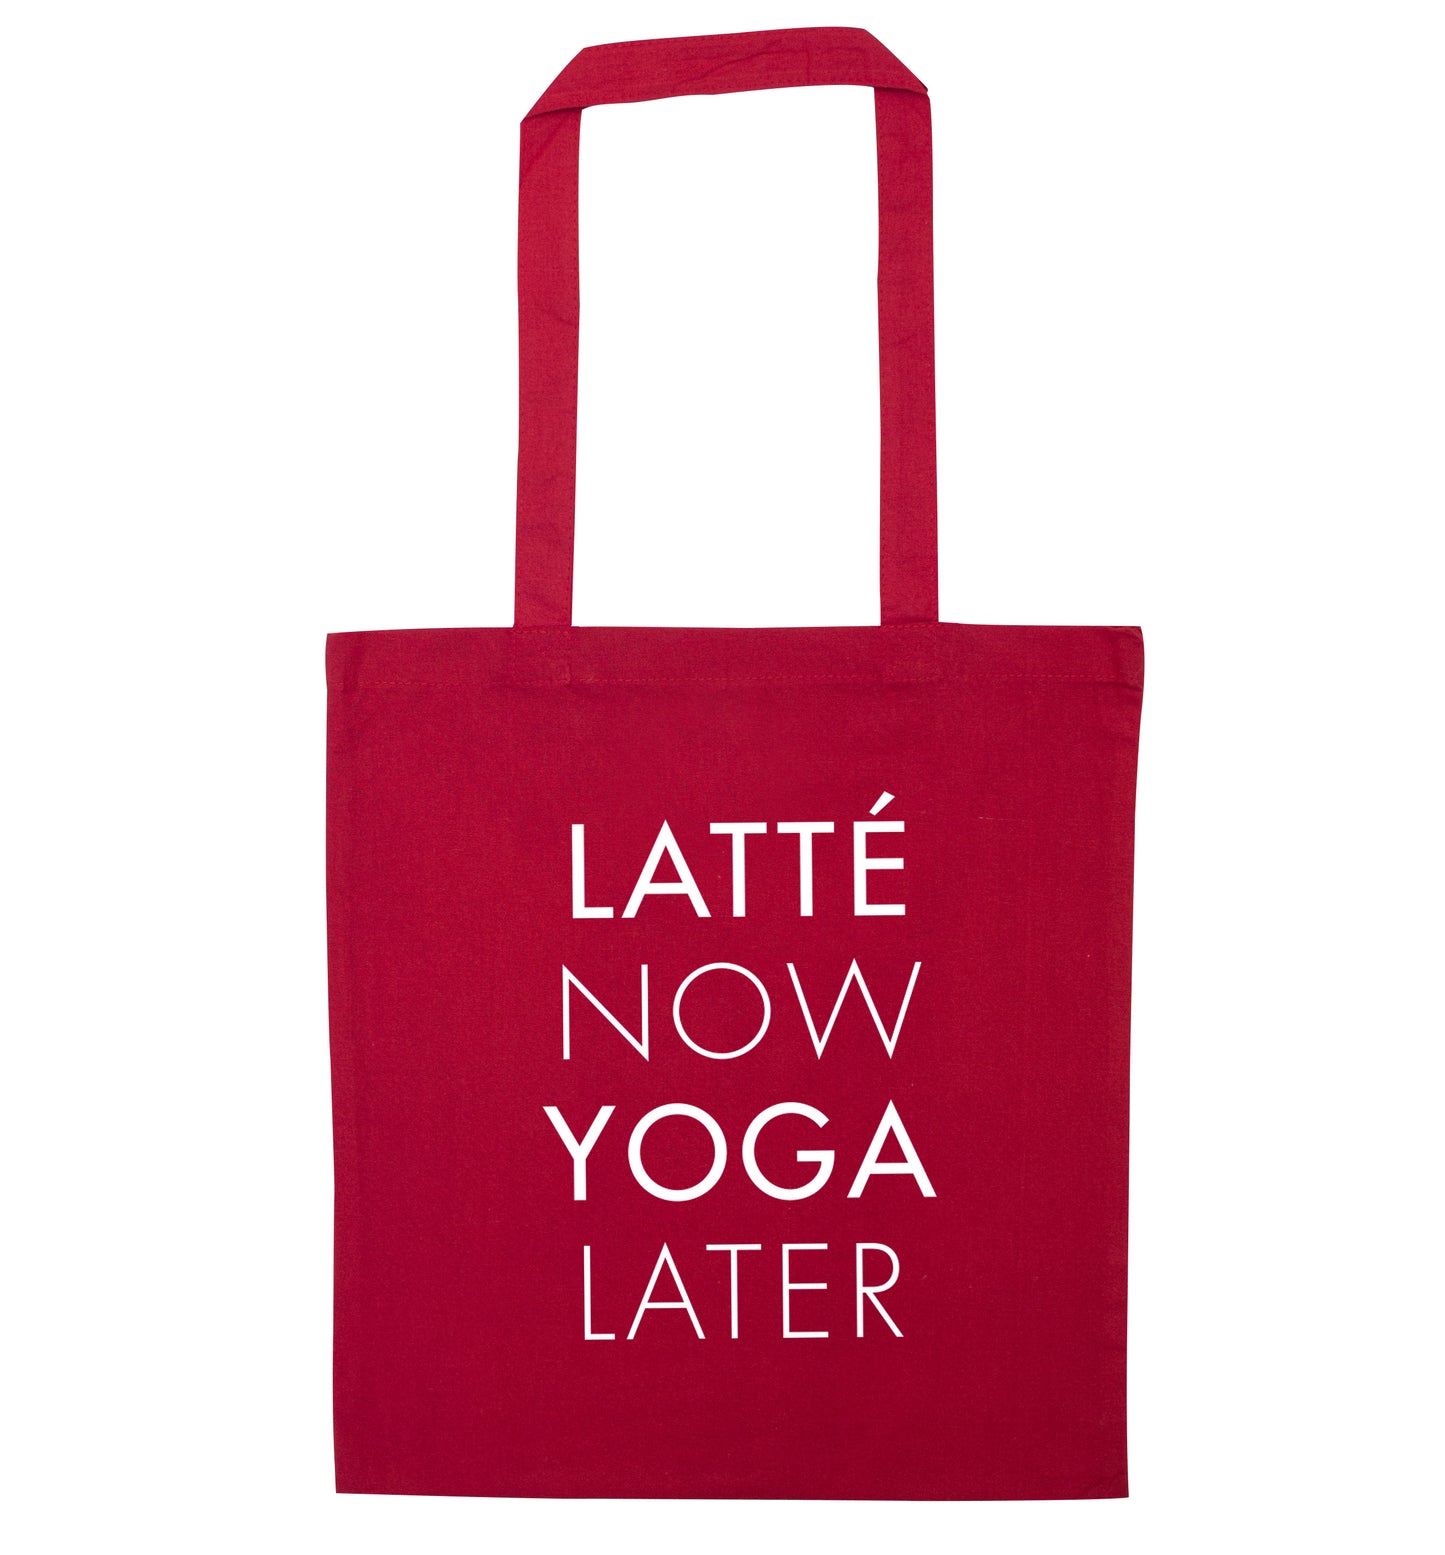 Latte now yoga later red tote bag